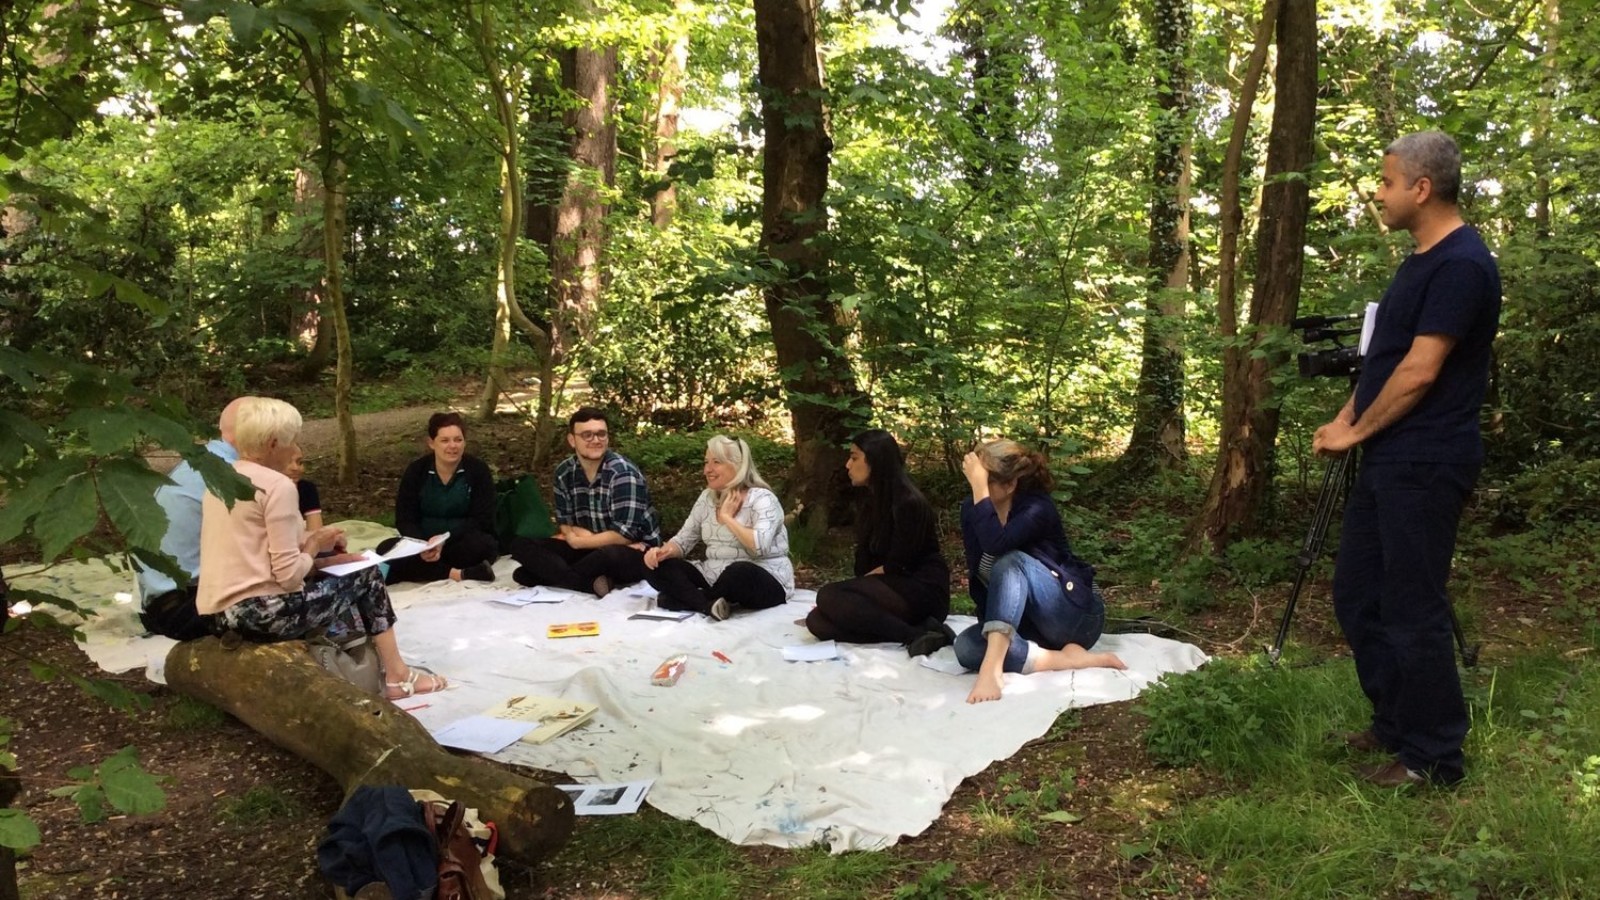 People sit around a blanket in a forest having a discussion.